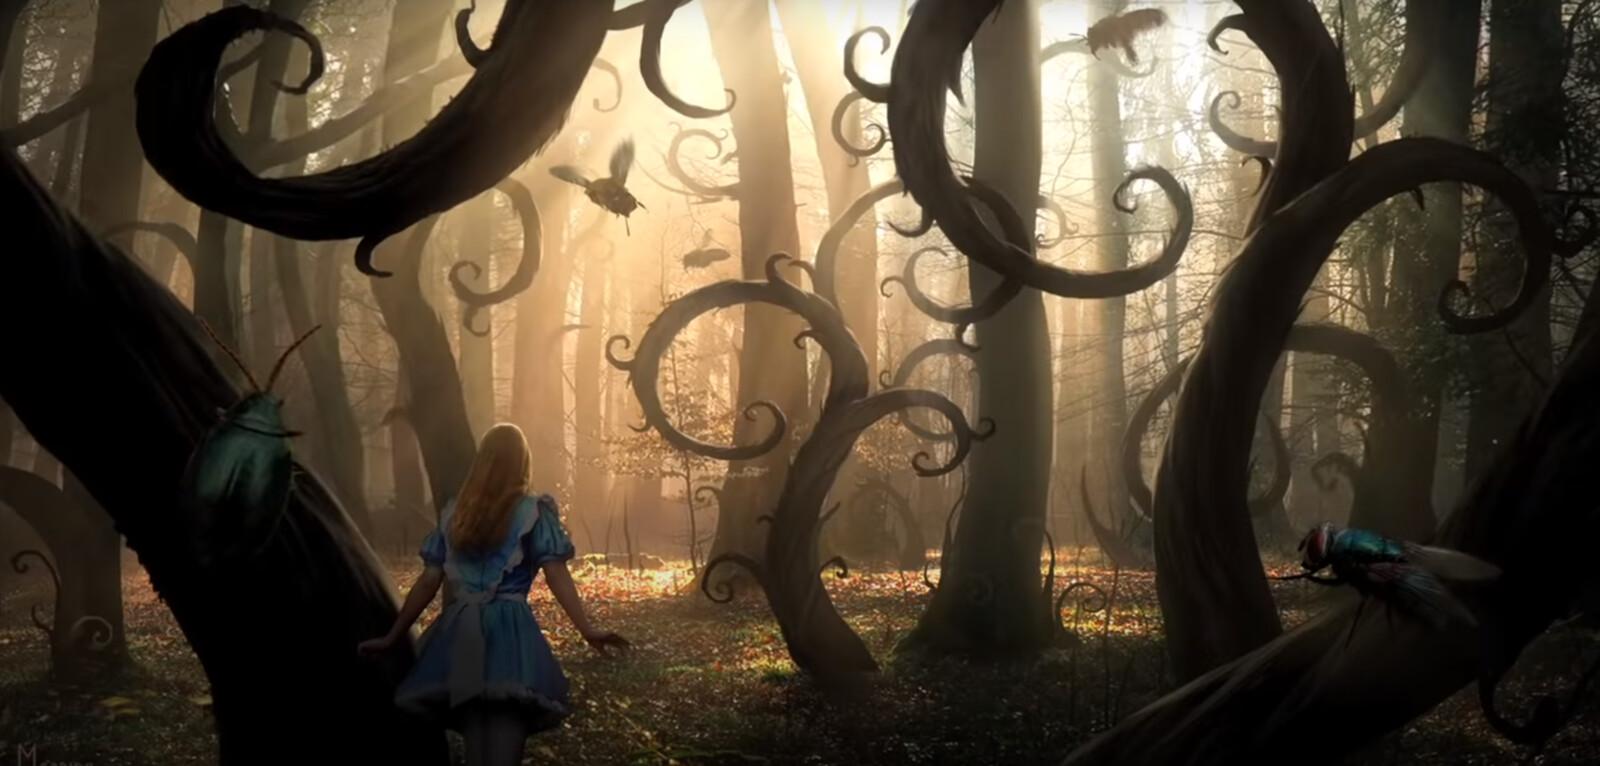 Reference image from Alice in Wonderland